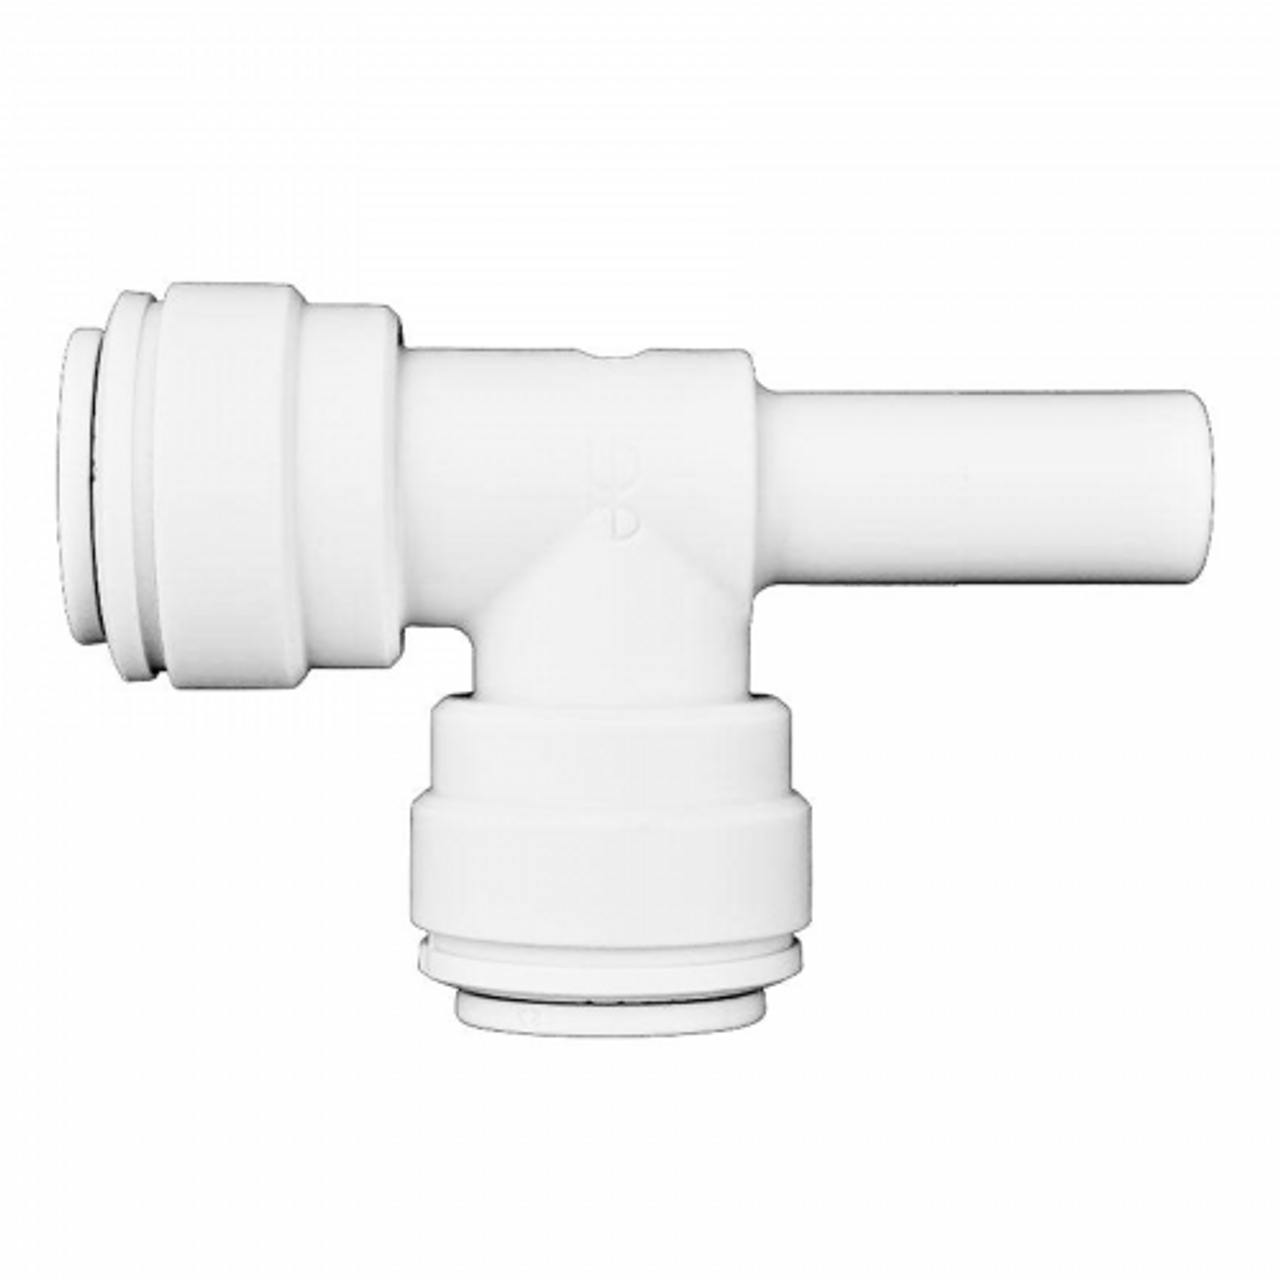 3/8 x 3/8 x 3/8" JG® White Polypropylene Push-To-Connect - Male Stem - Push-To-Connect Stackable Tee  PP101223W